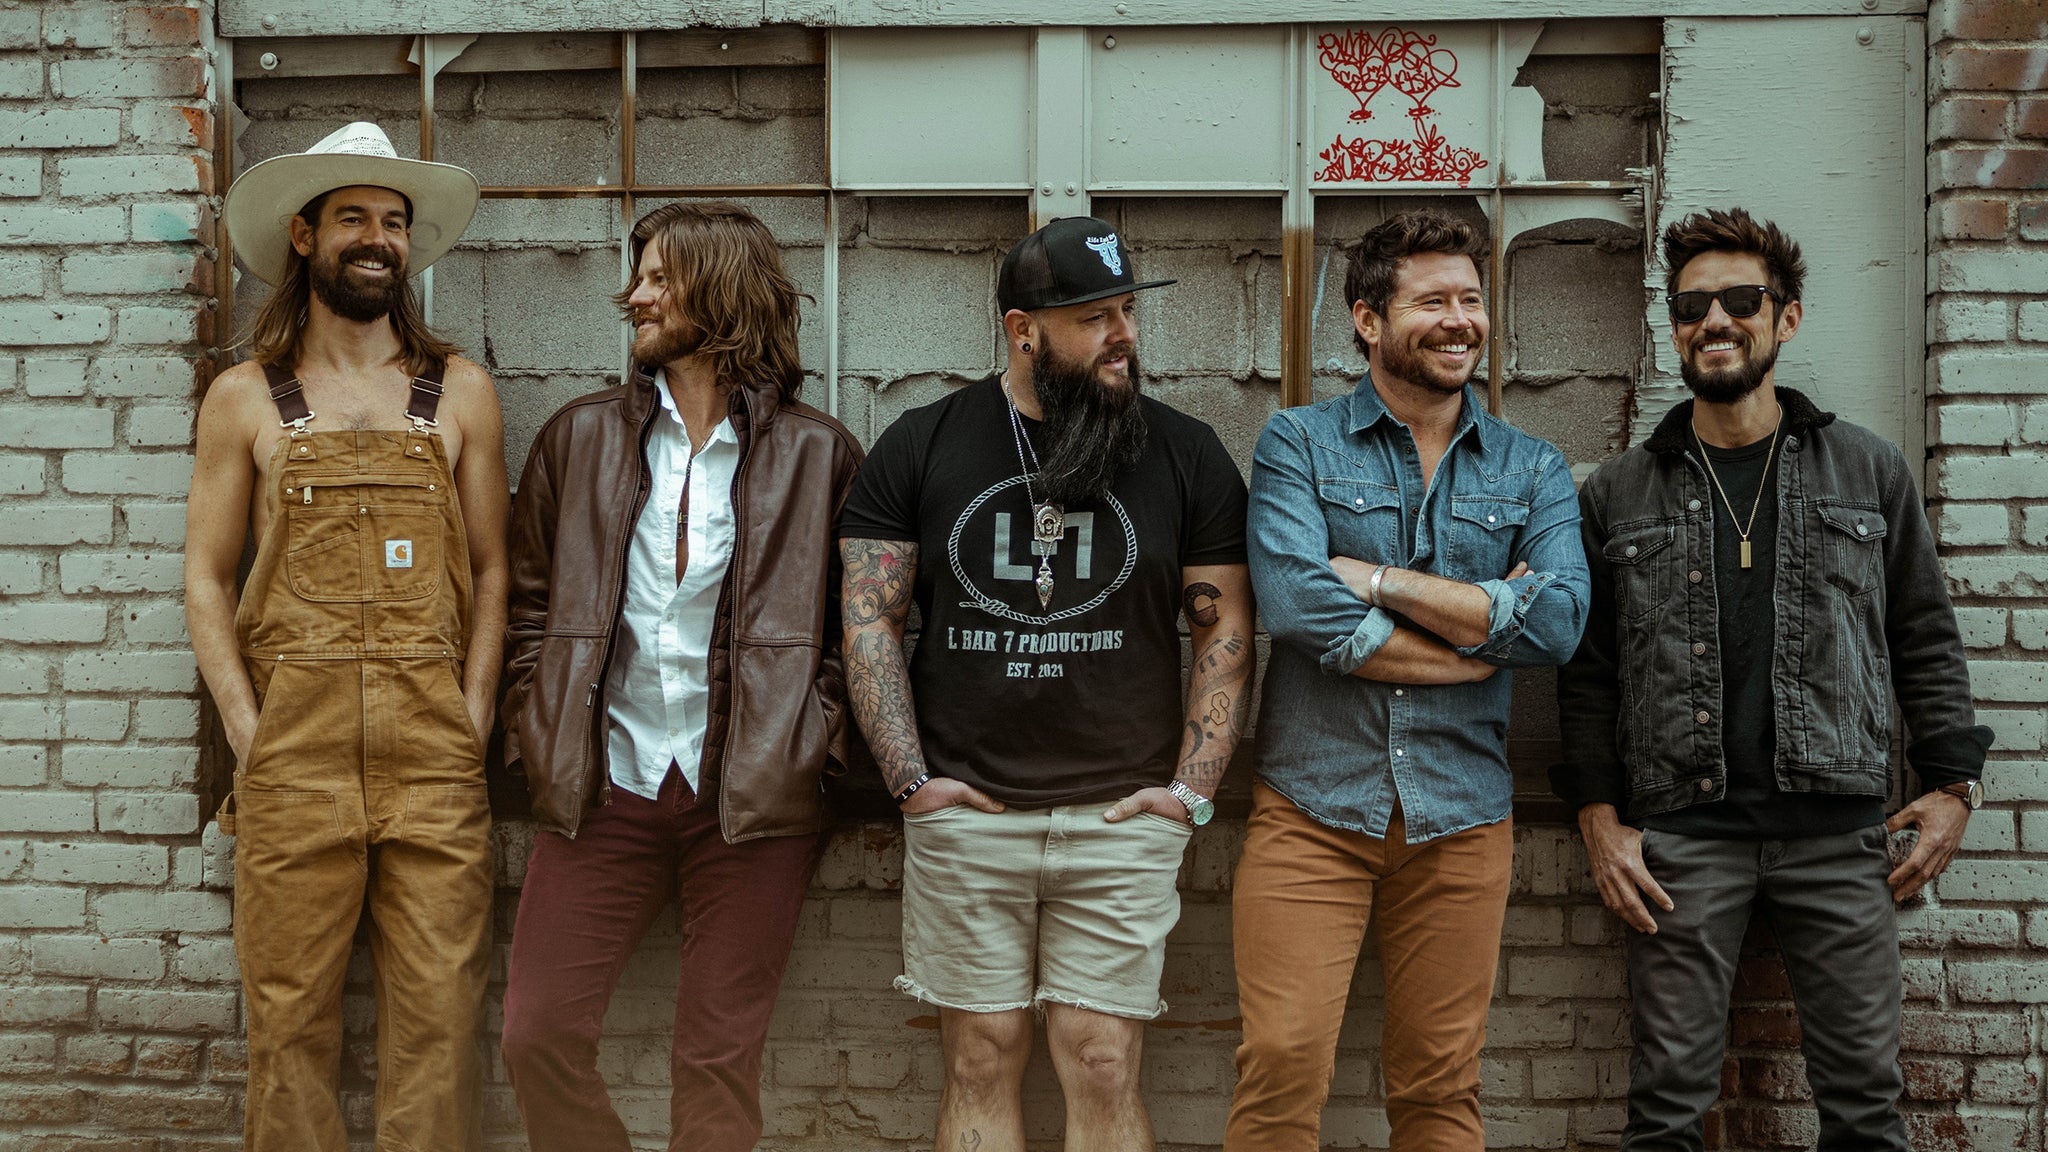 Shane Smith and the Saints in Charlottesville promo photo for Live Nation presale offer code